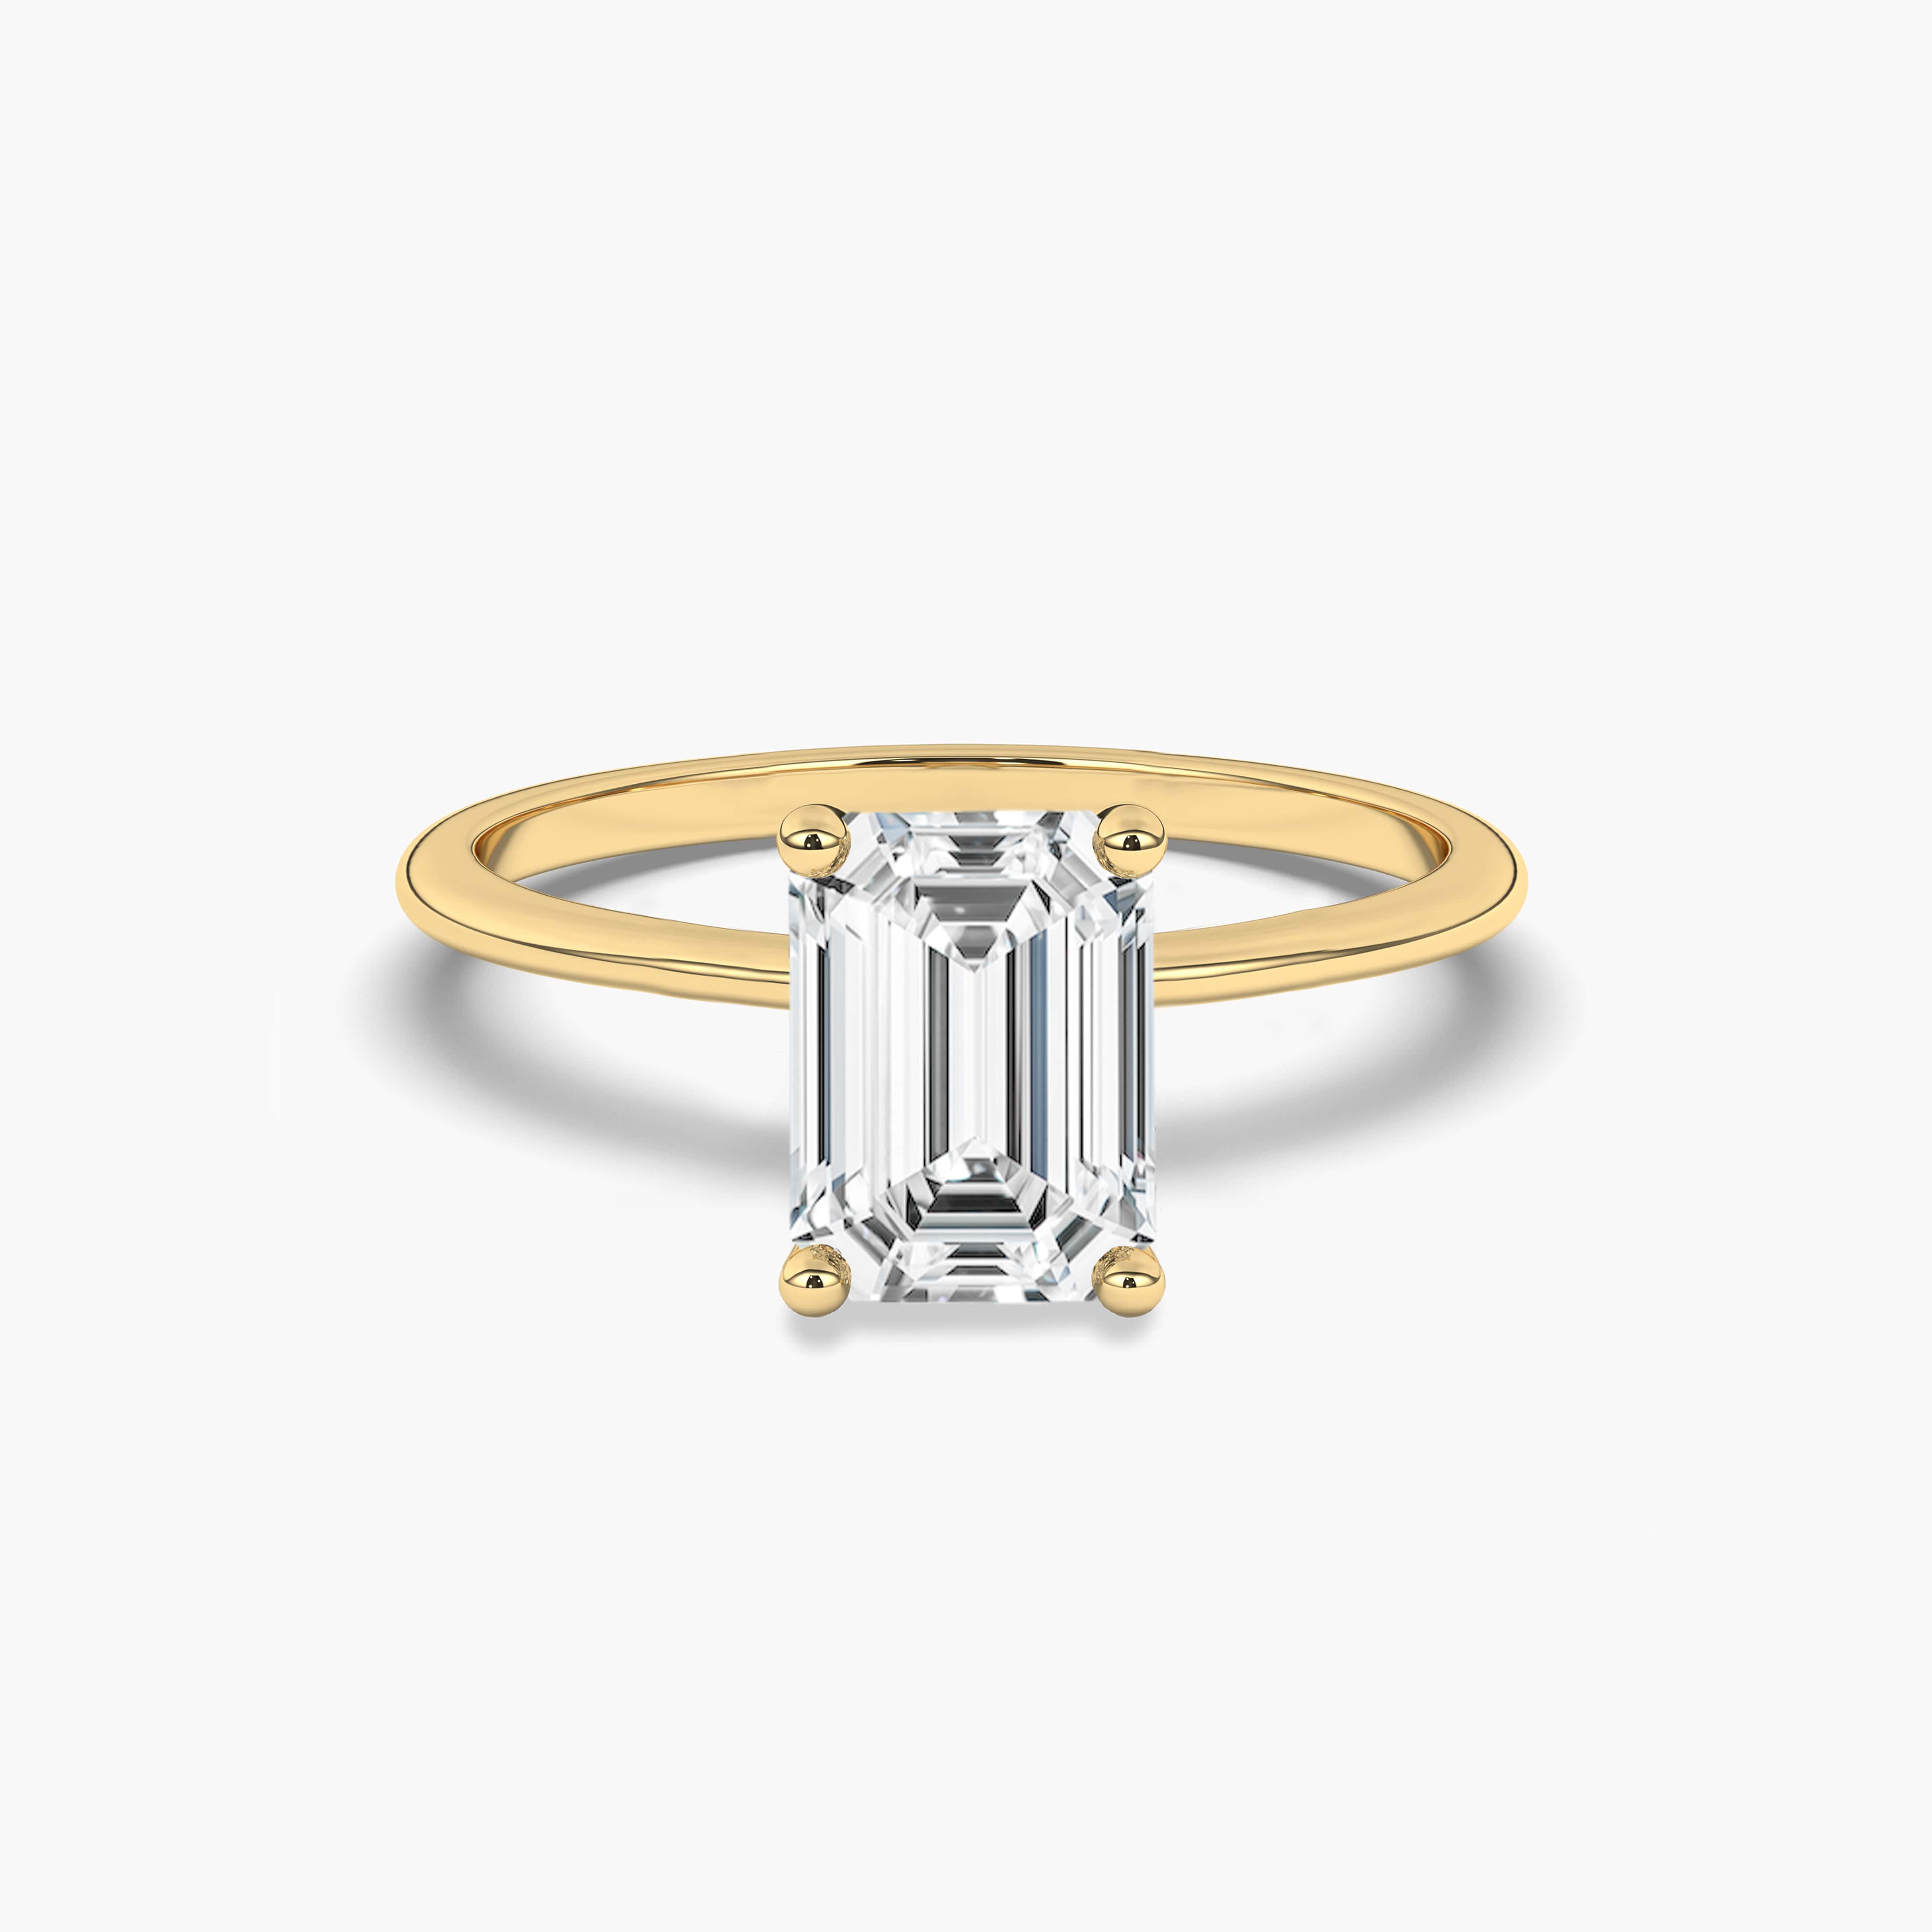 Emerald cut solitaire engagement rings